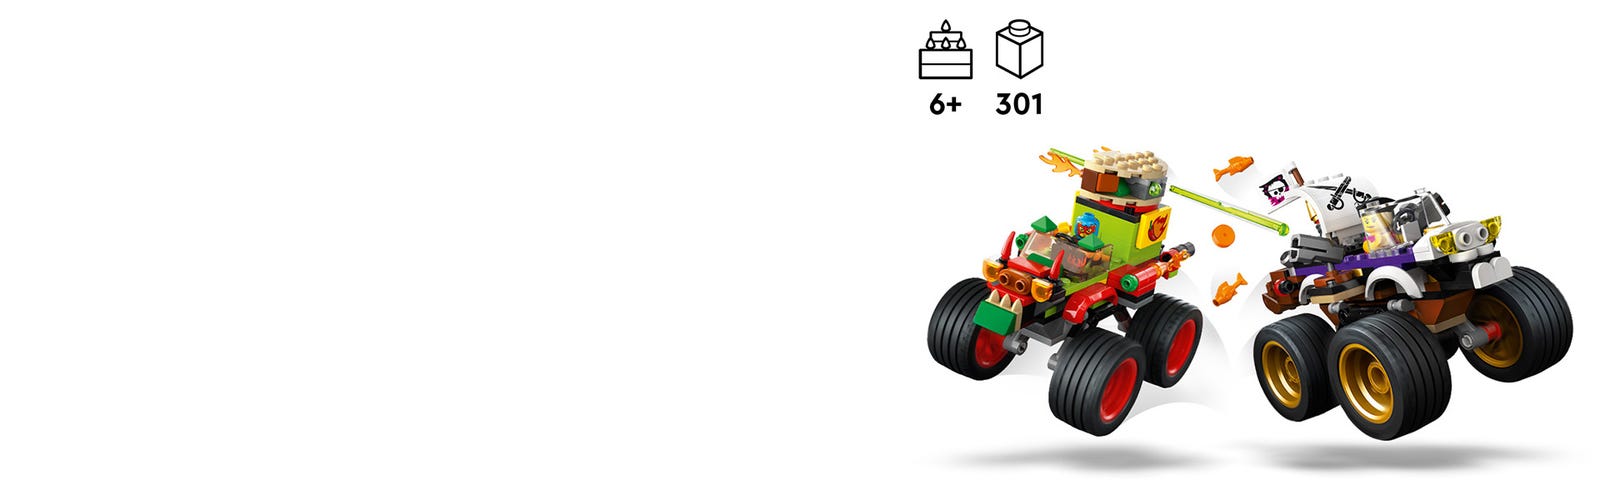 Monster Truck Race 60397 | City | Buy online at the Official LEGO® Shop US